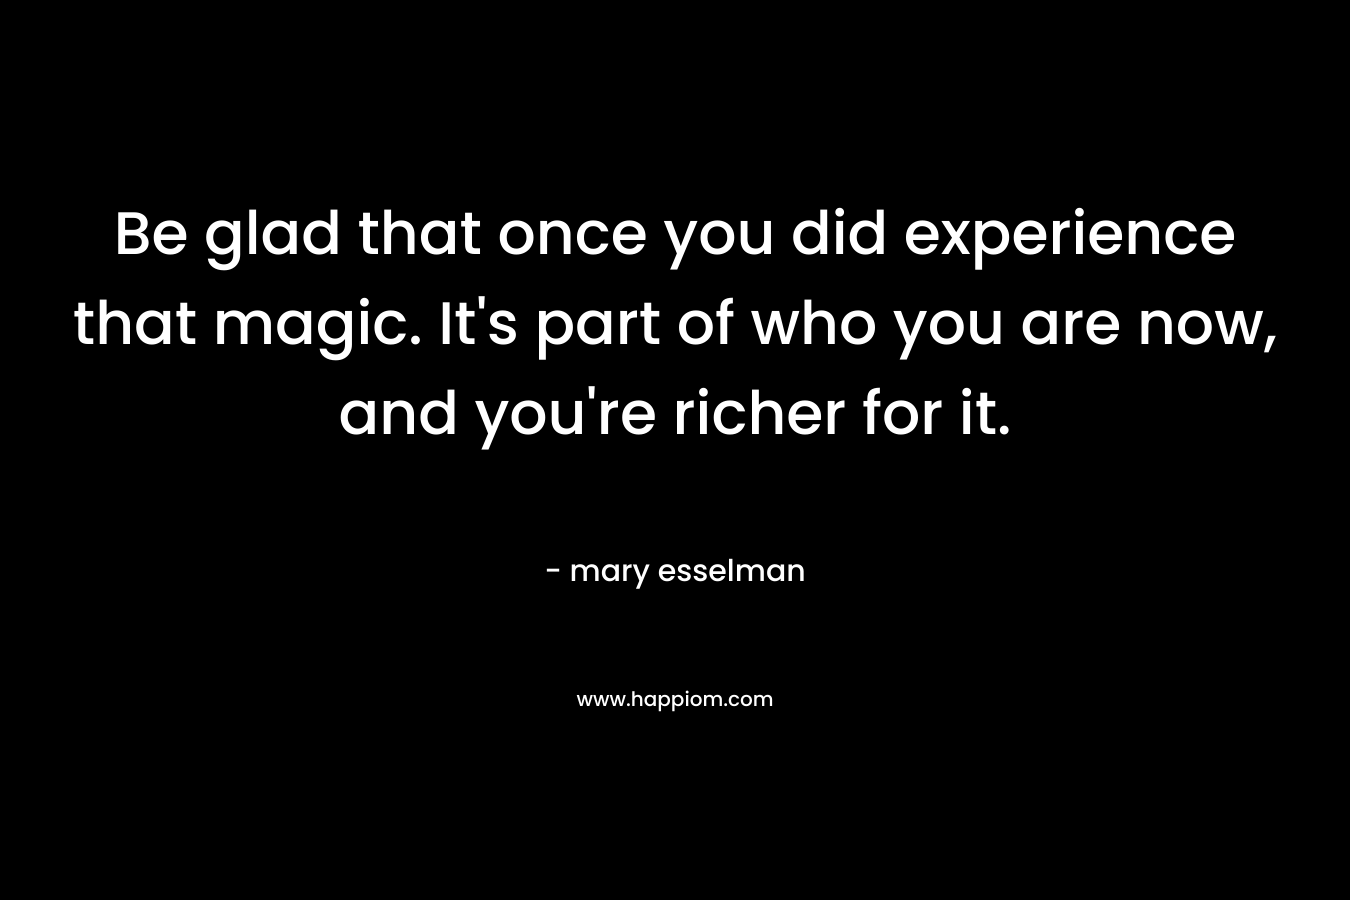 Be glad that once you did experience that magic. It's part of who you are now, and you're richer for it.